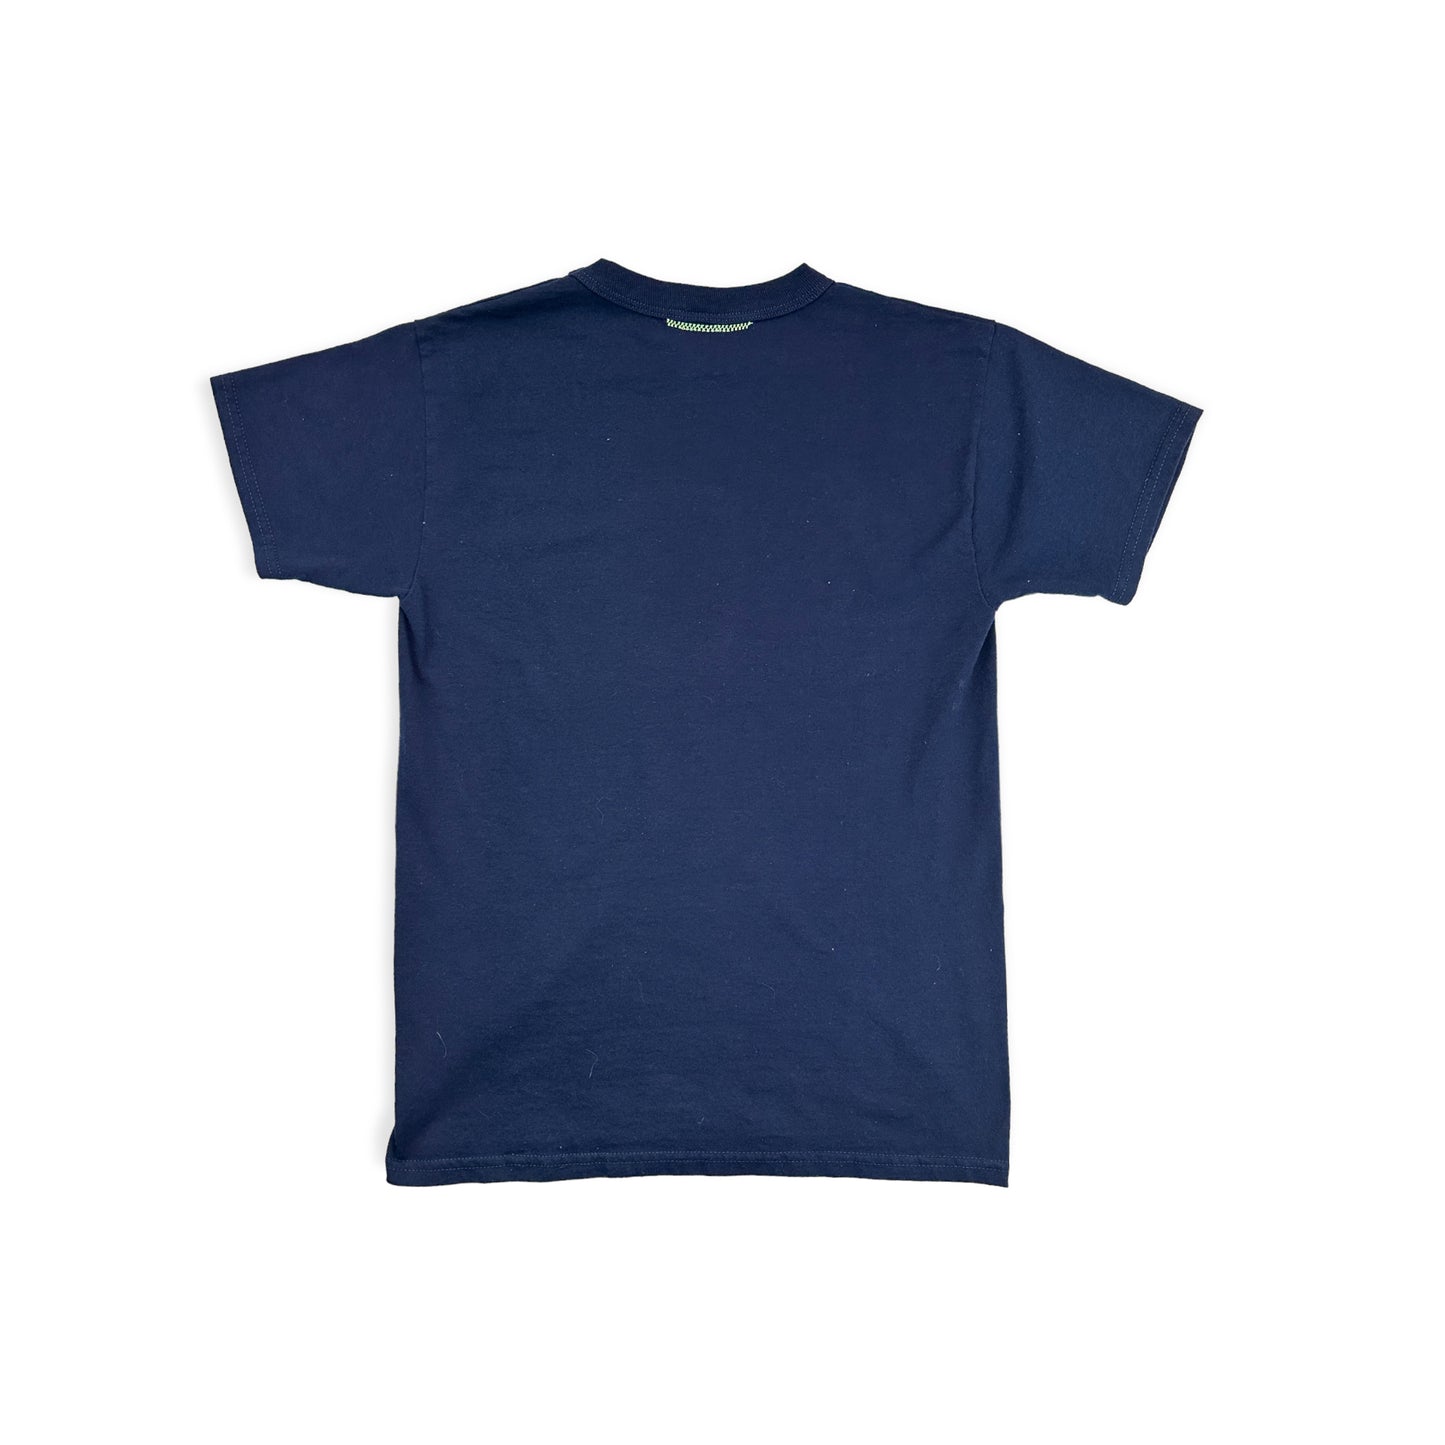 LEISURE - Navy Outline Logo Tee - Size Adult S